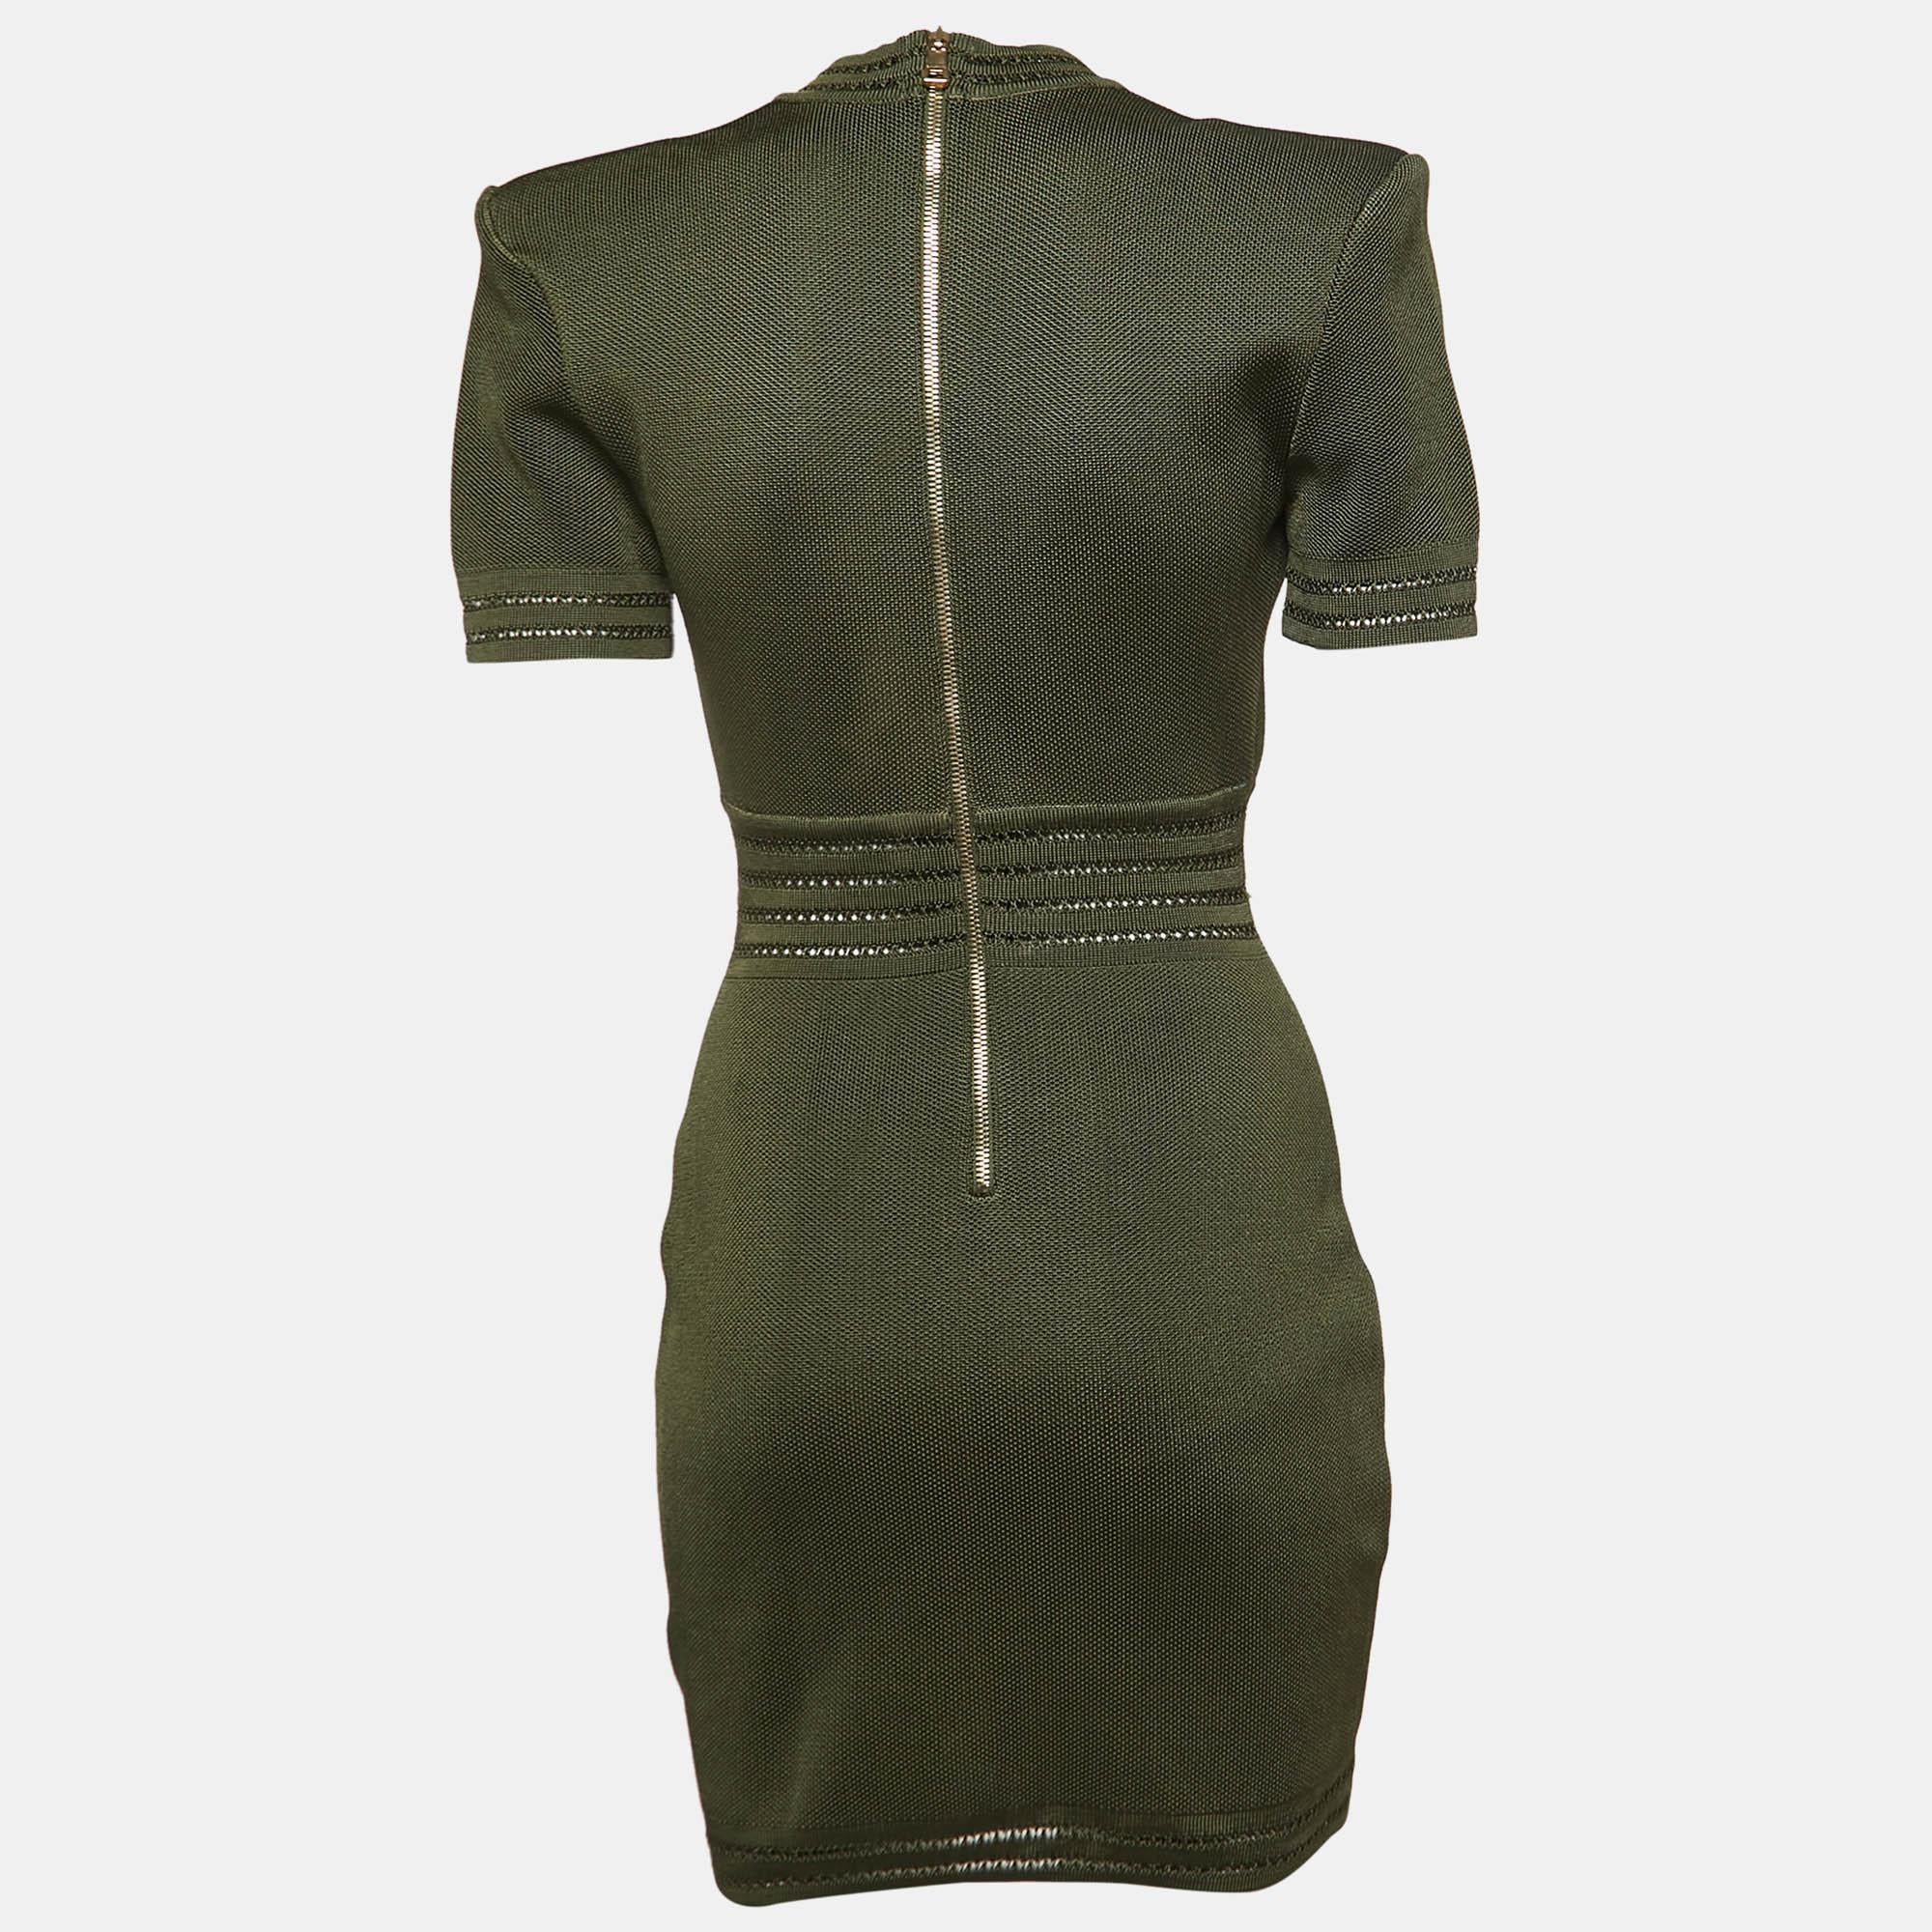 Make a luxe fashion statement by wearing this Balmain military green mini dress. It is sewn using knit fabric into a flattering silhouette.

